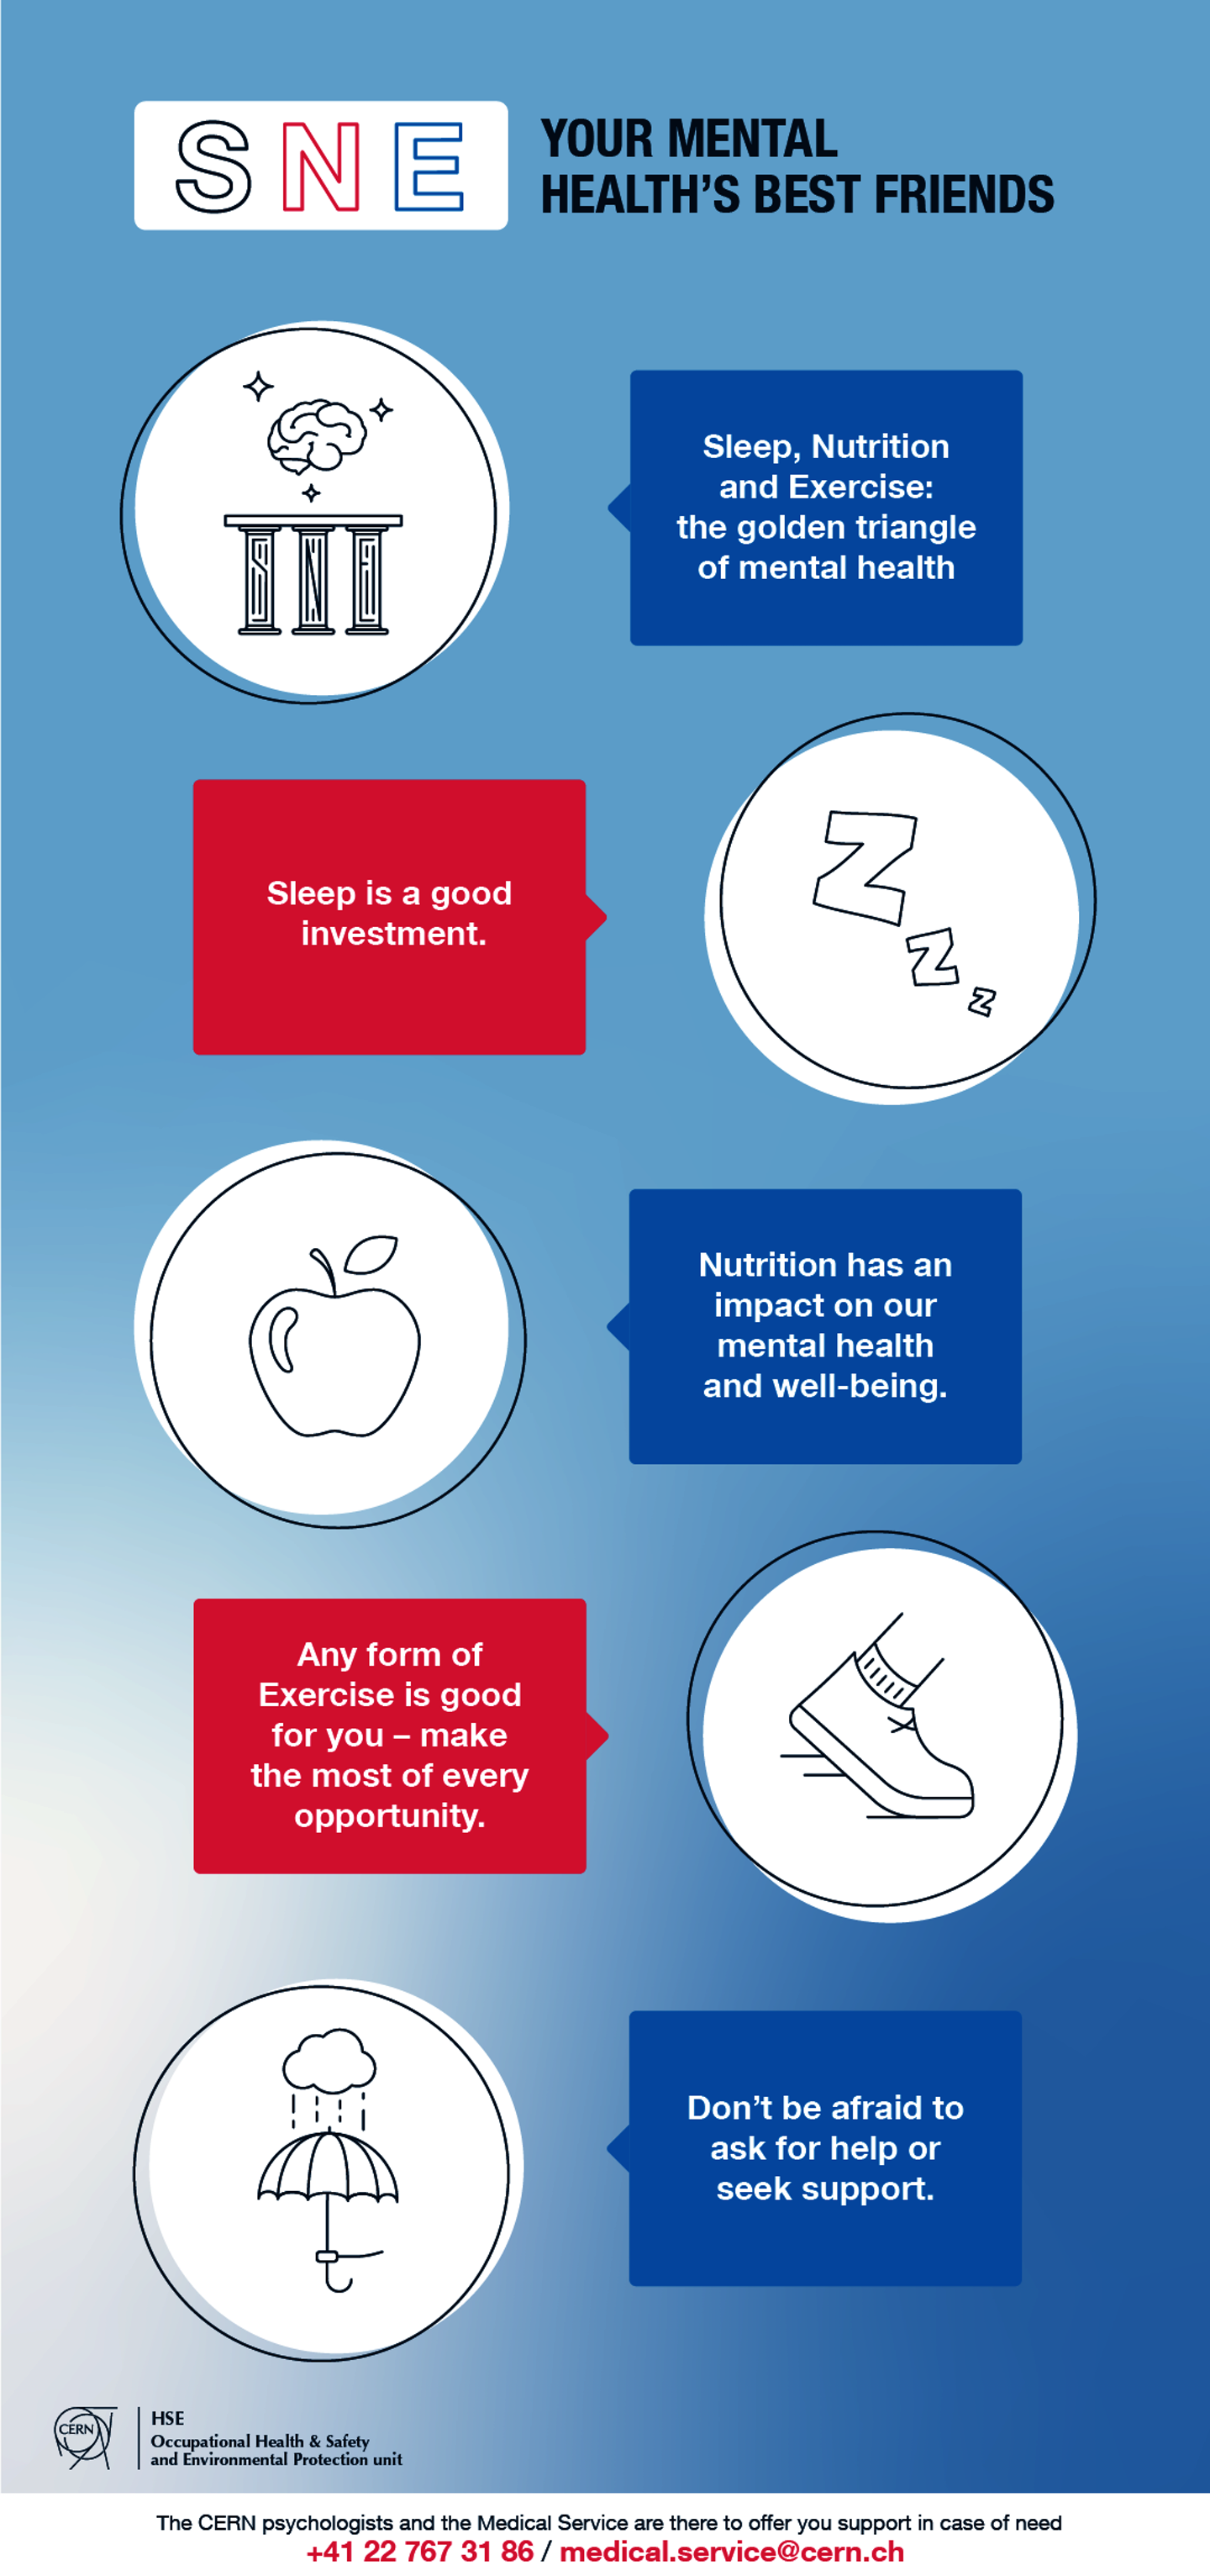 How does diet and exercise impact sleep schedules?